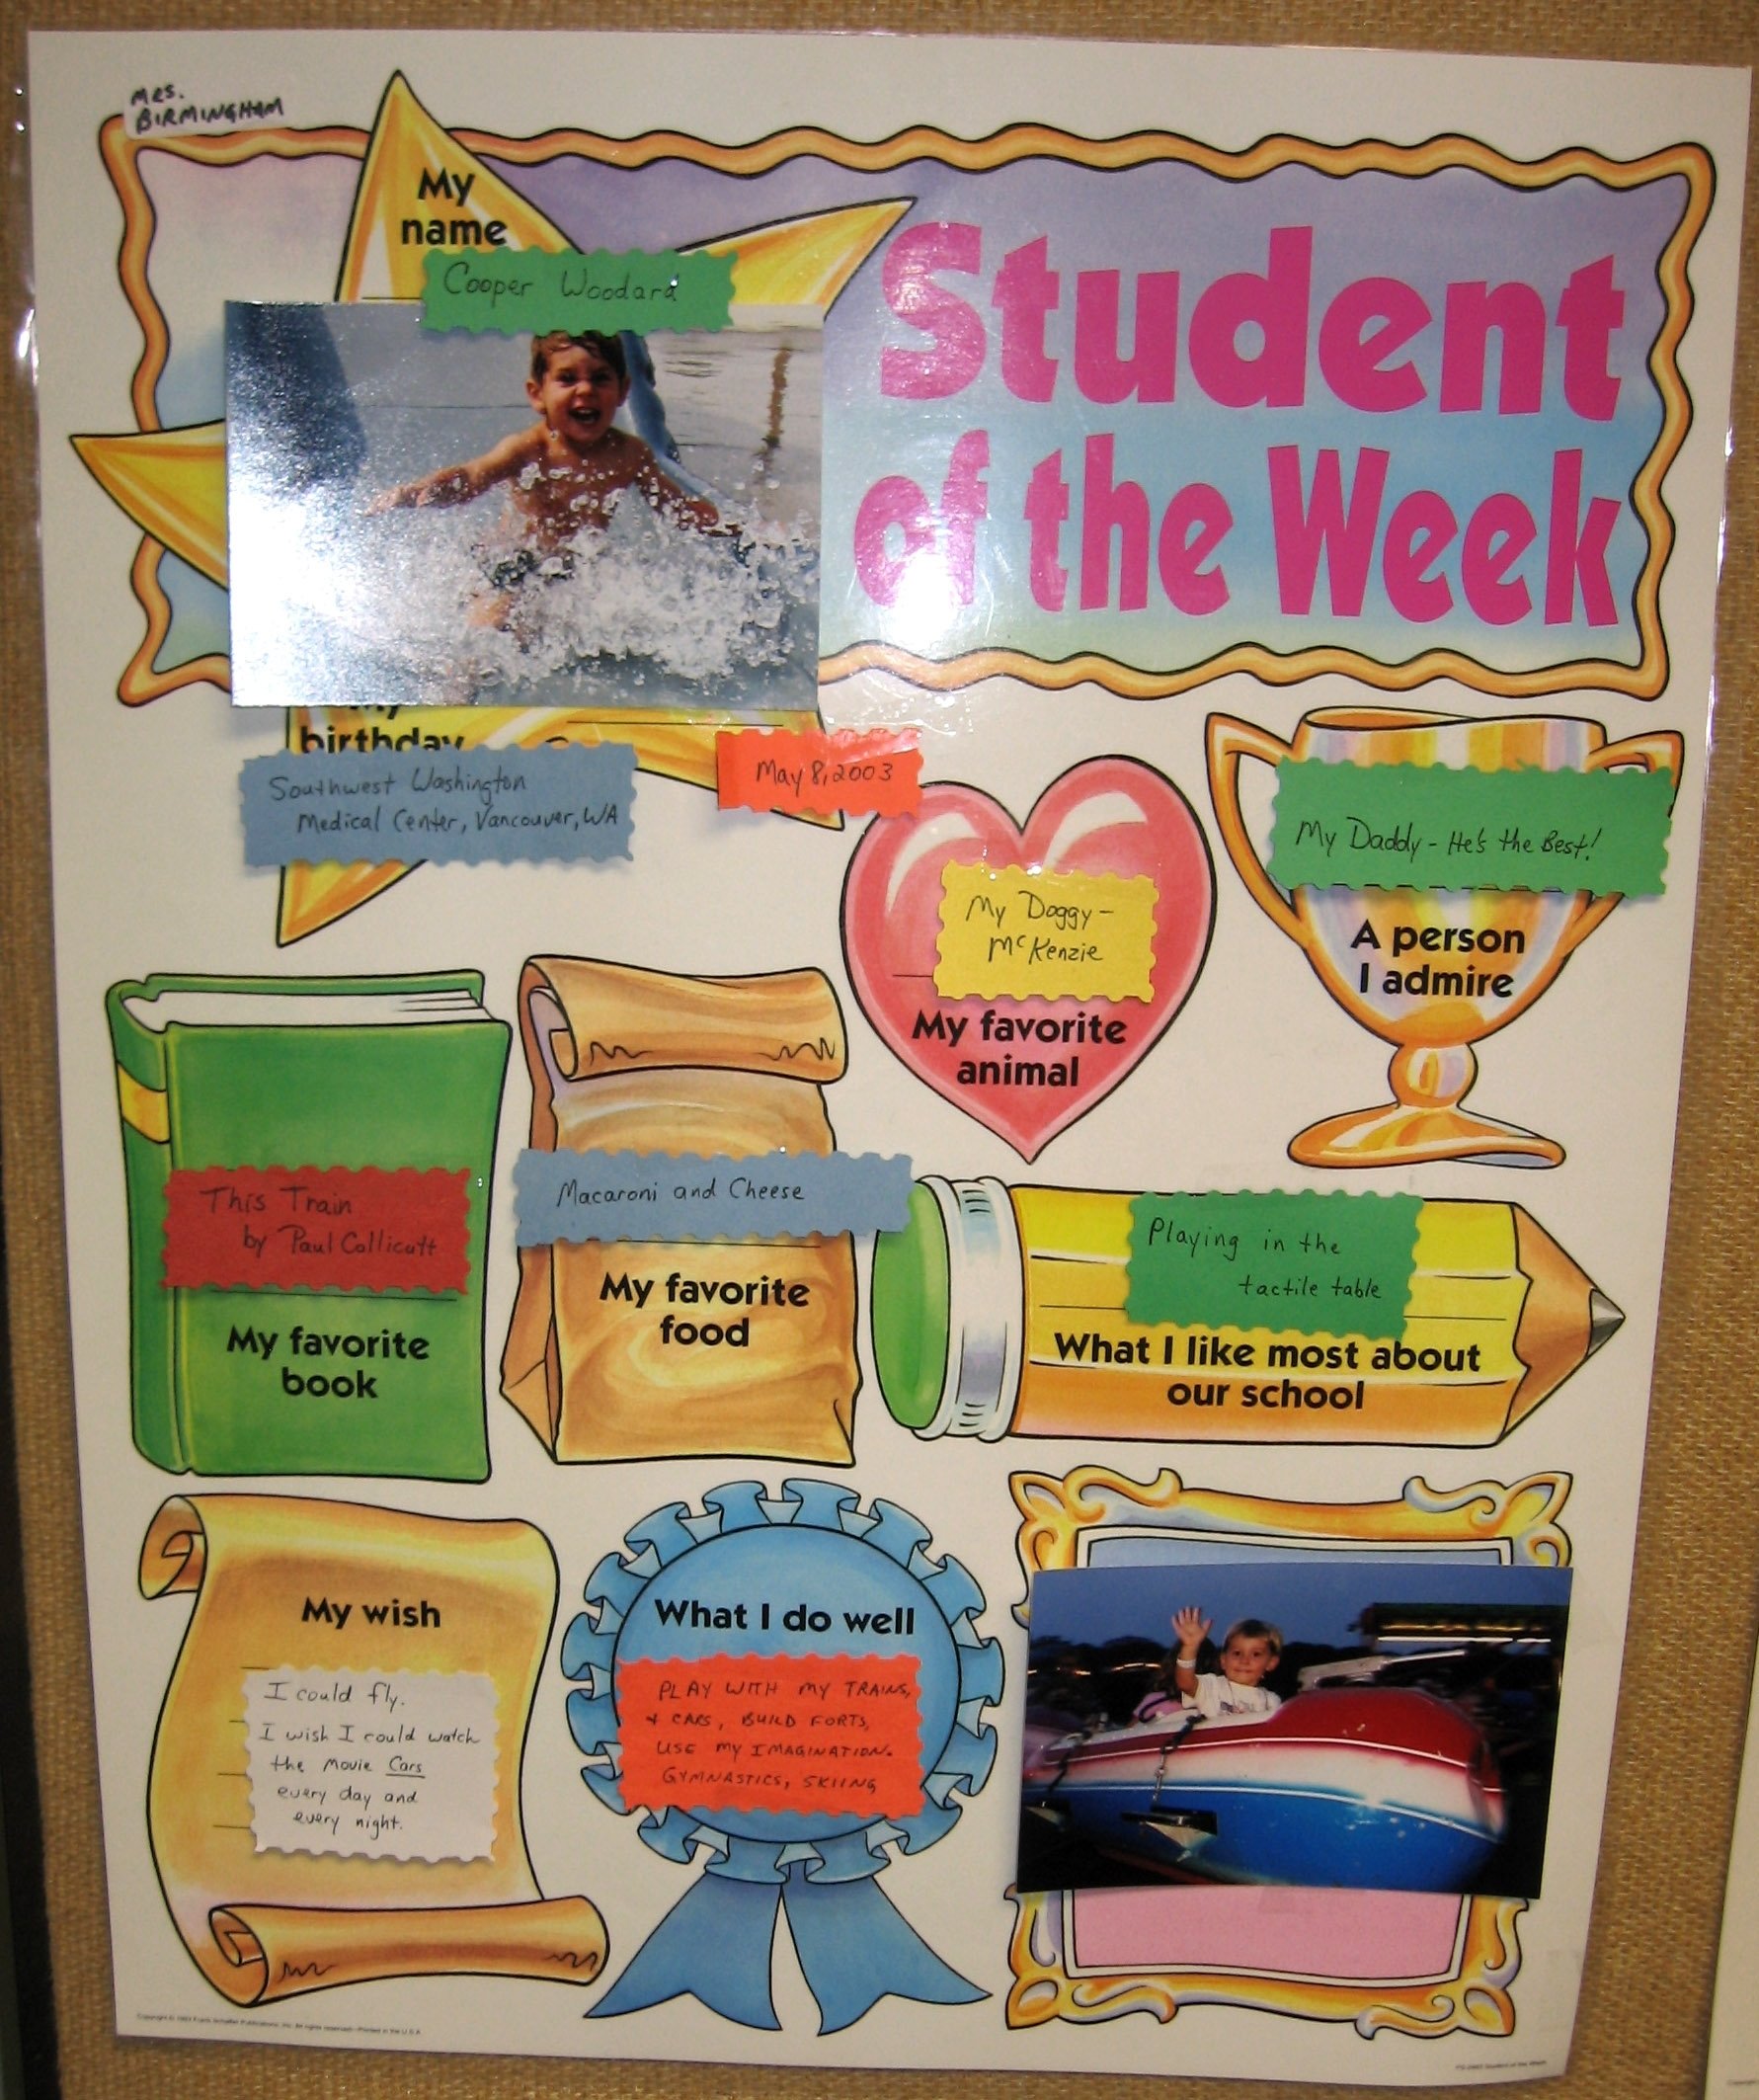 10 Awesome Student Of The Week Ideas cooper woodard photos 2007 25 april 2022